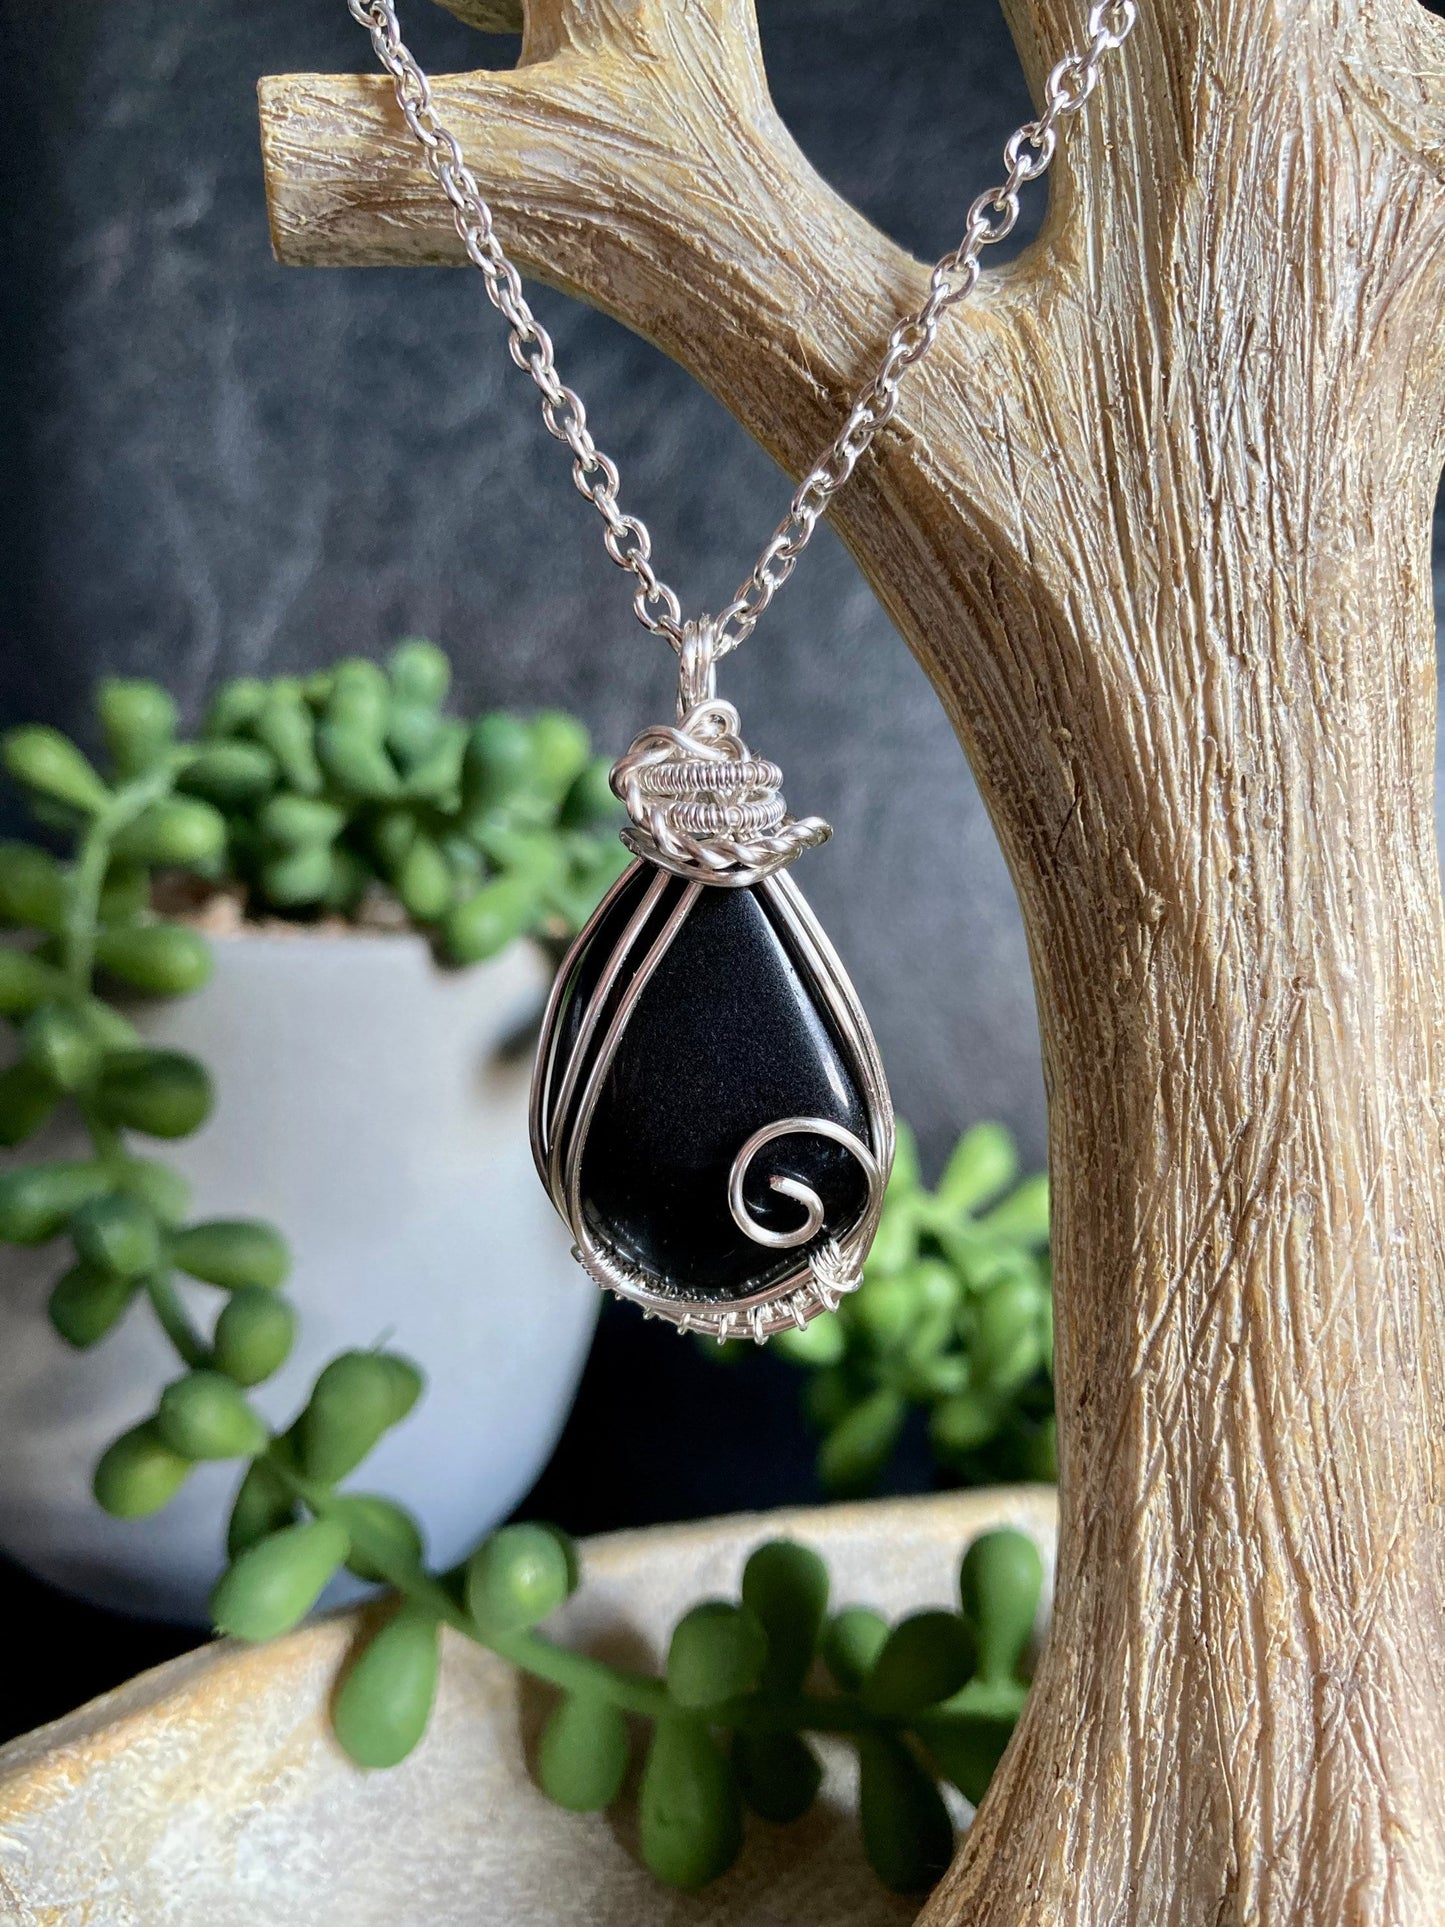 Obsidian pendant handmade necklace wire wrapped natural stone with 18 inch length chain